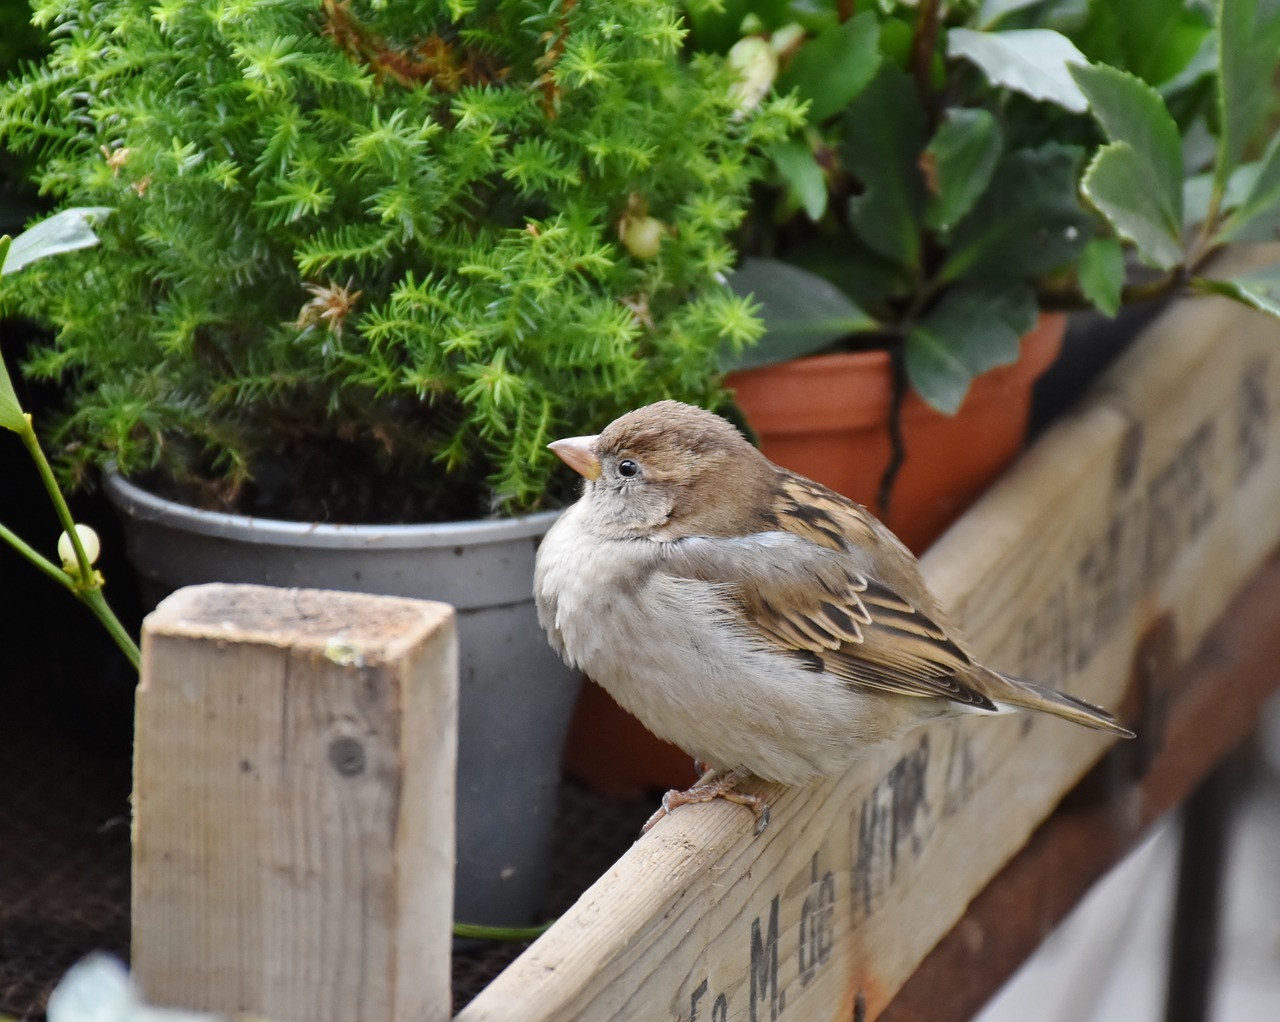 sparrow sperling house sparrow free photo